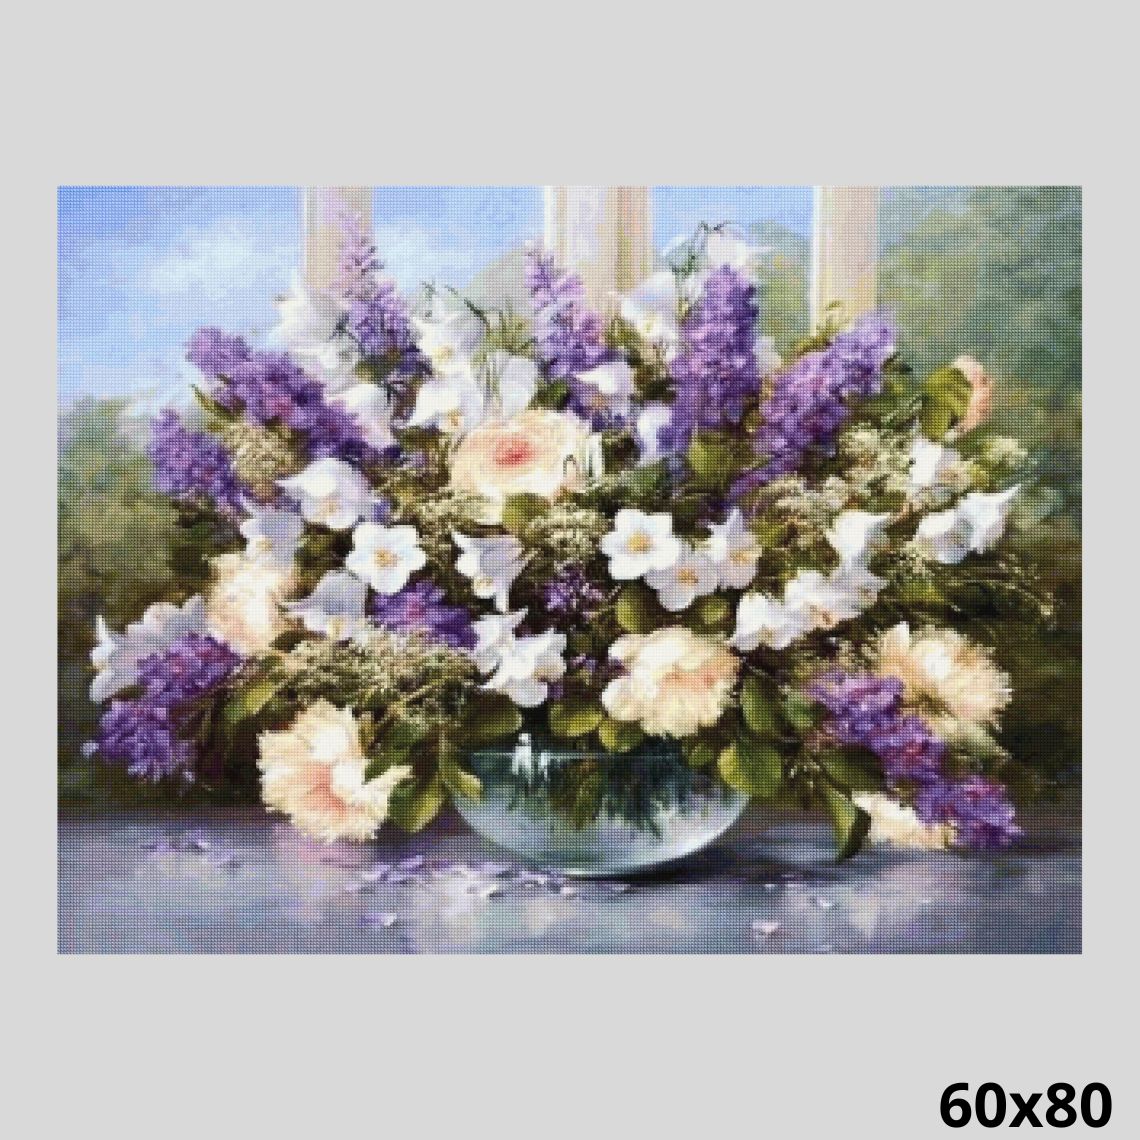 Bouquet Flowers in Bowl 60x80 - Diamond Painting